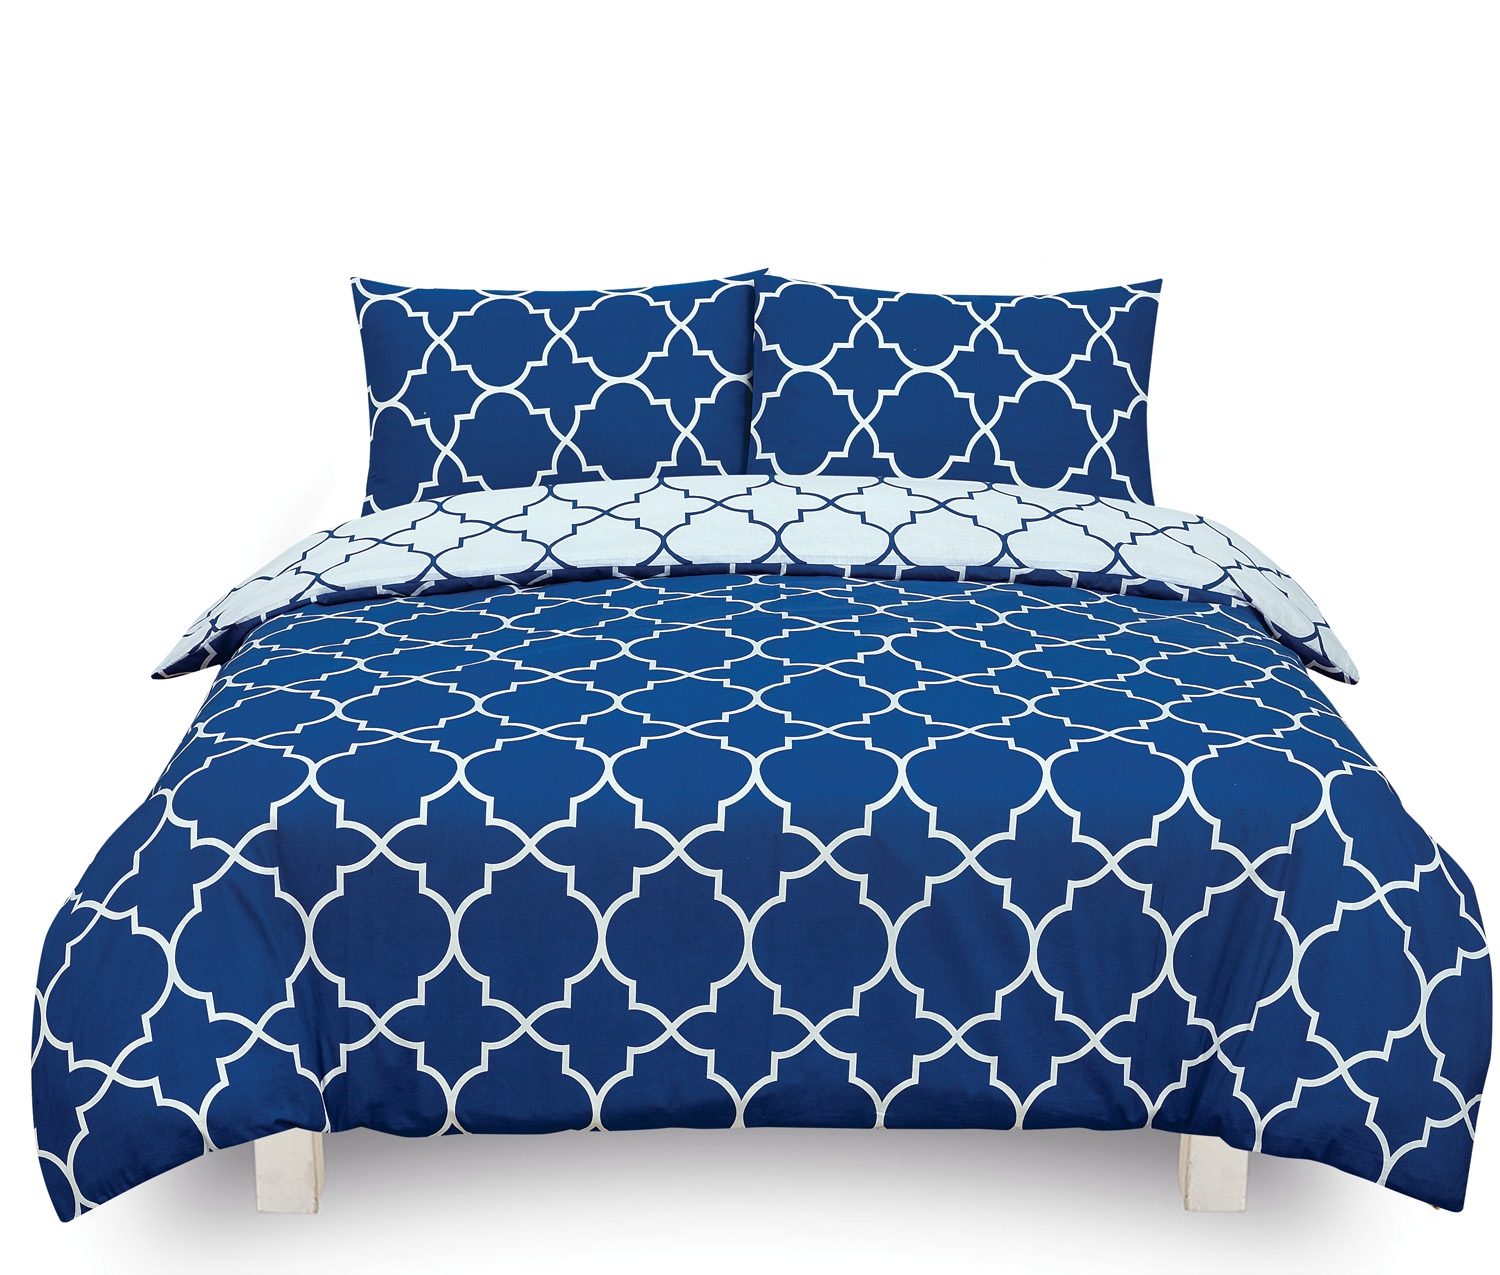 Morrocan Blue Reversible Rotary Double Bed Duvet Quilt Cover Set